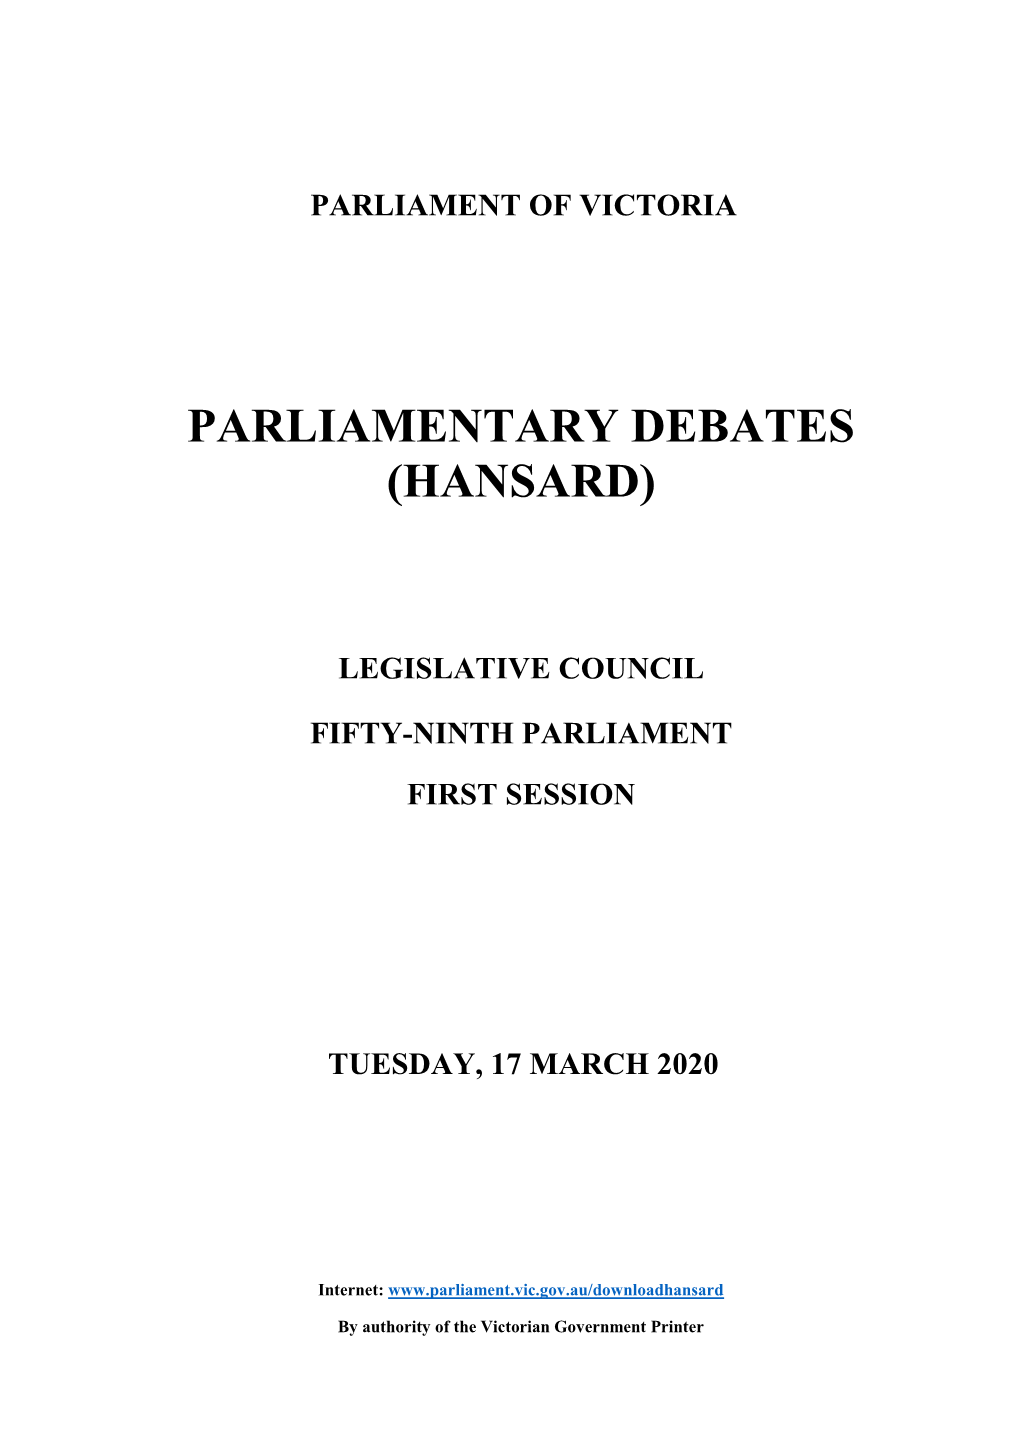 Legislative Council Fifty-Ninth Parliament First Session Tuesday, 17 March 2020